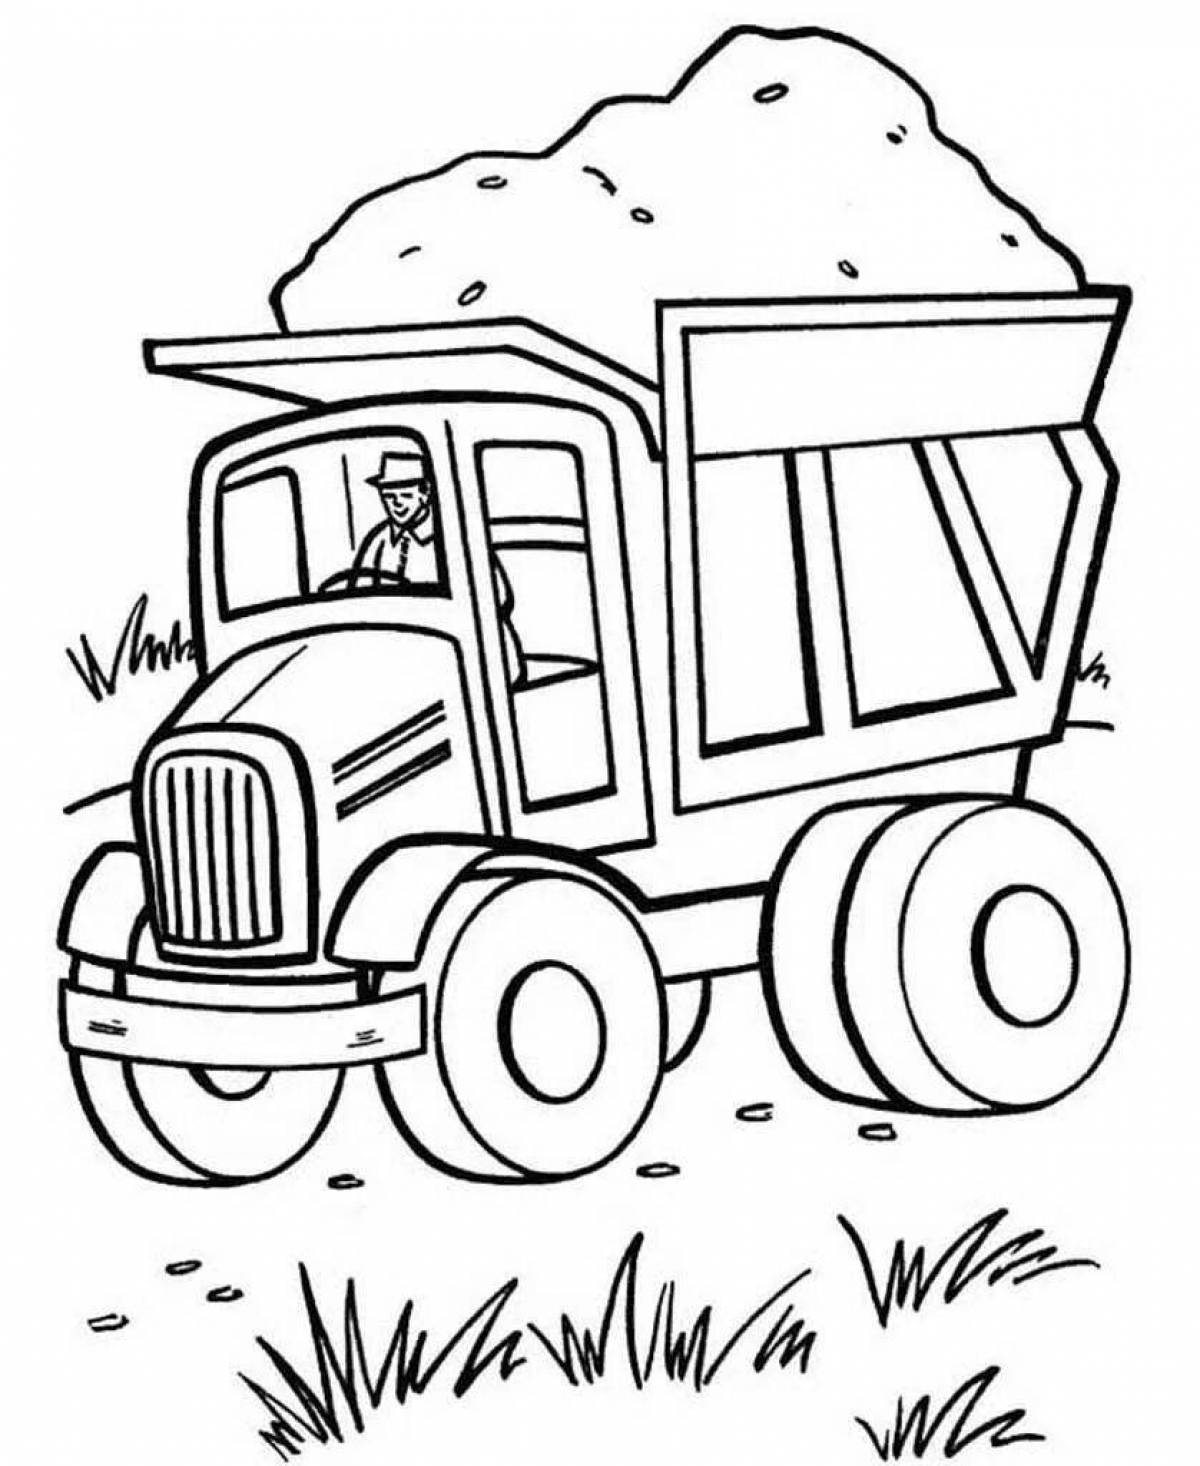 Colorful dump truck coloring page for kids